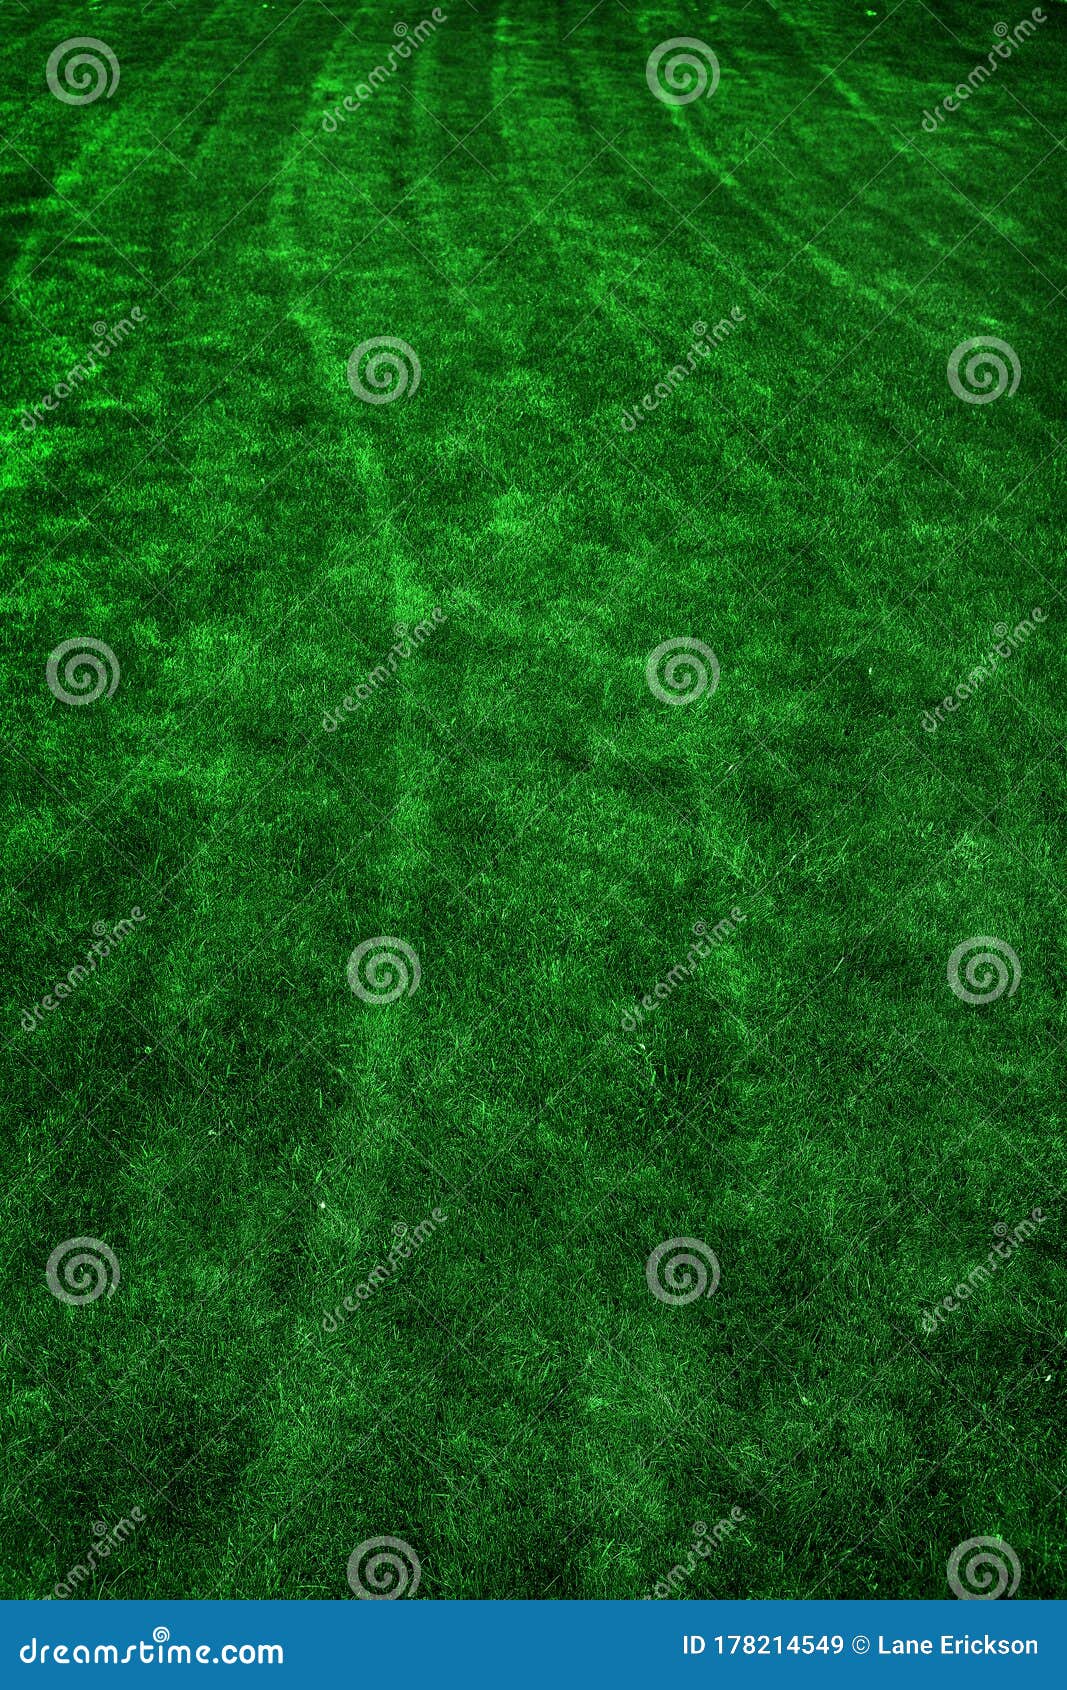 Lush Green Lawn Grass Yard Spring Growth Stock Image - Image of lawn